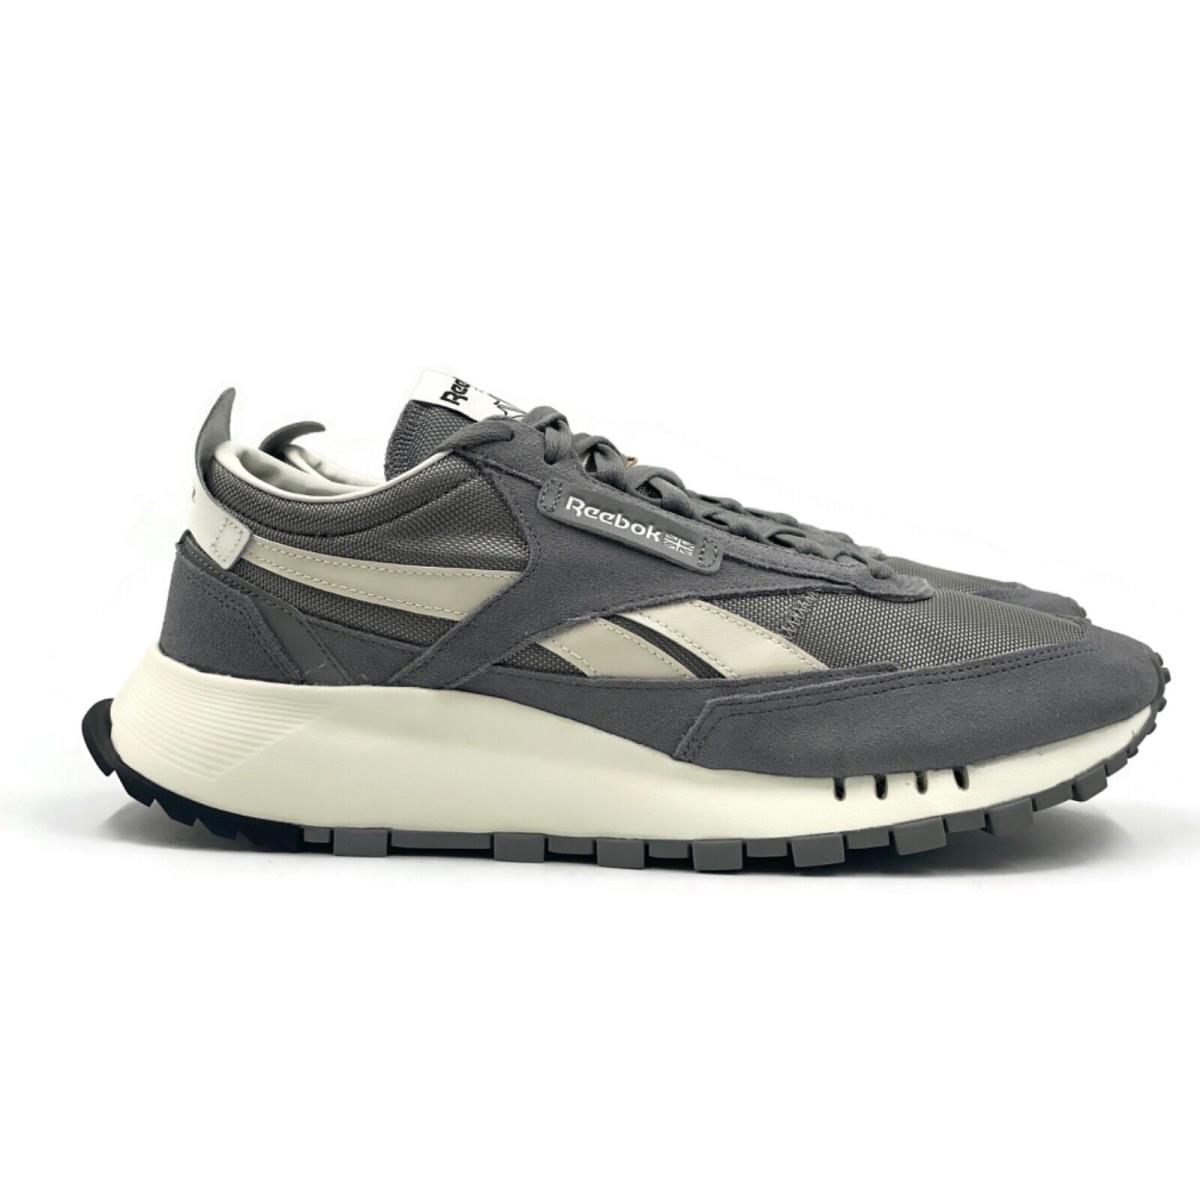 Reebok CL Legacy Men Casual Running Shoe Gray White Sneaker Athletic Trainer